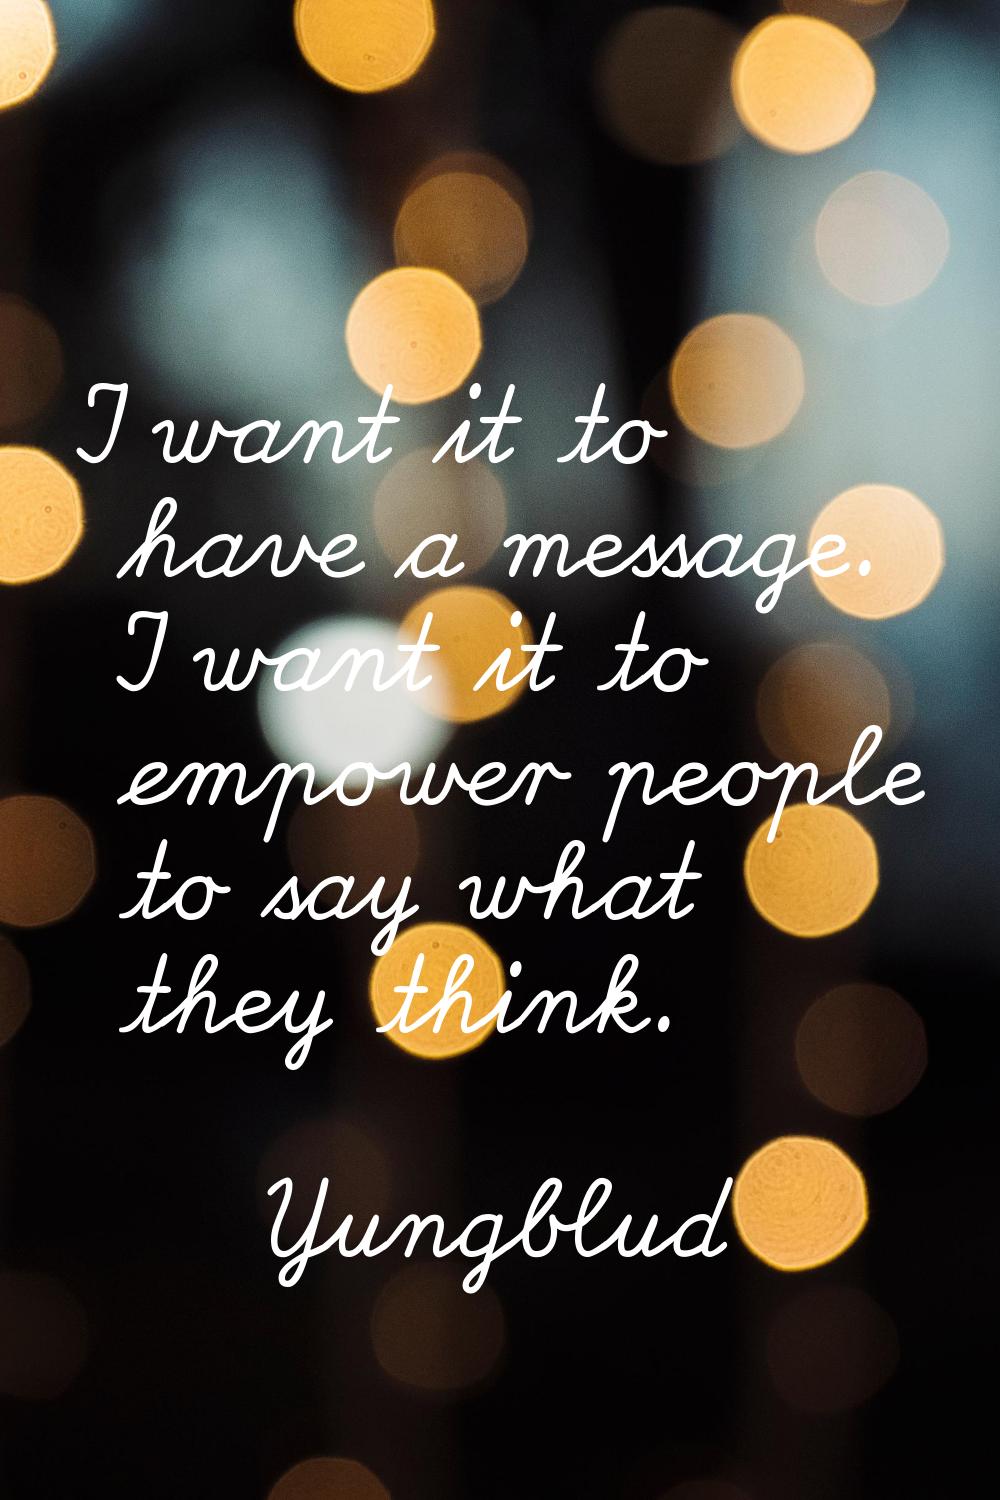 I want it to have a message. I want it to empower people to say what they think.